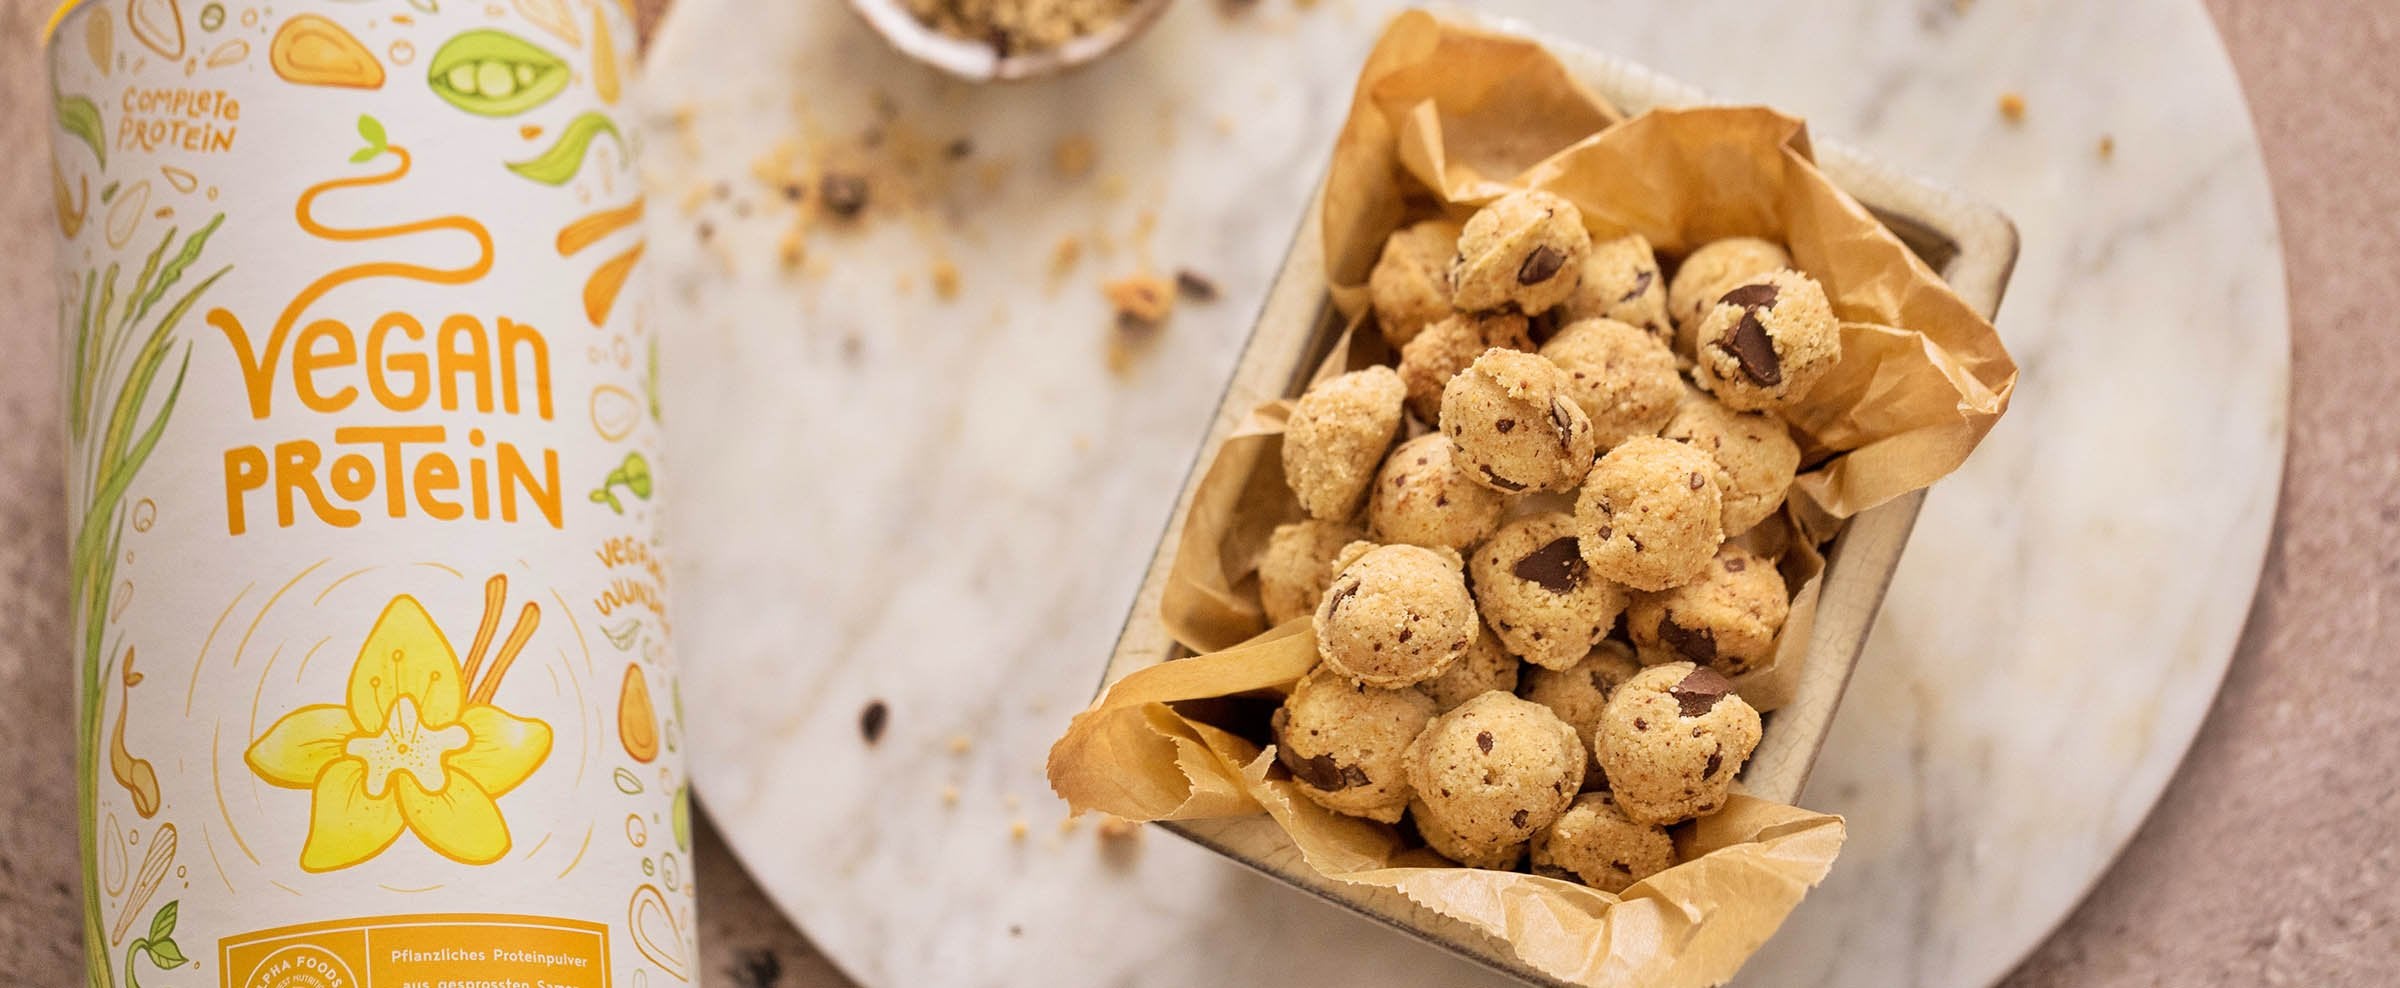 HEALTHY SNACKING - COOKIE DOUGH PROTEIN BALLS